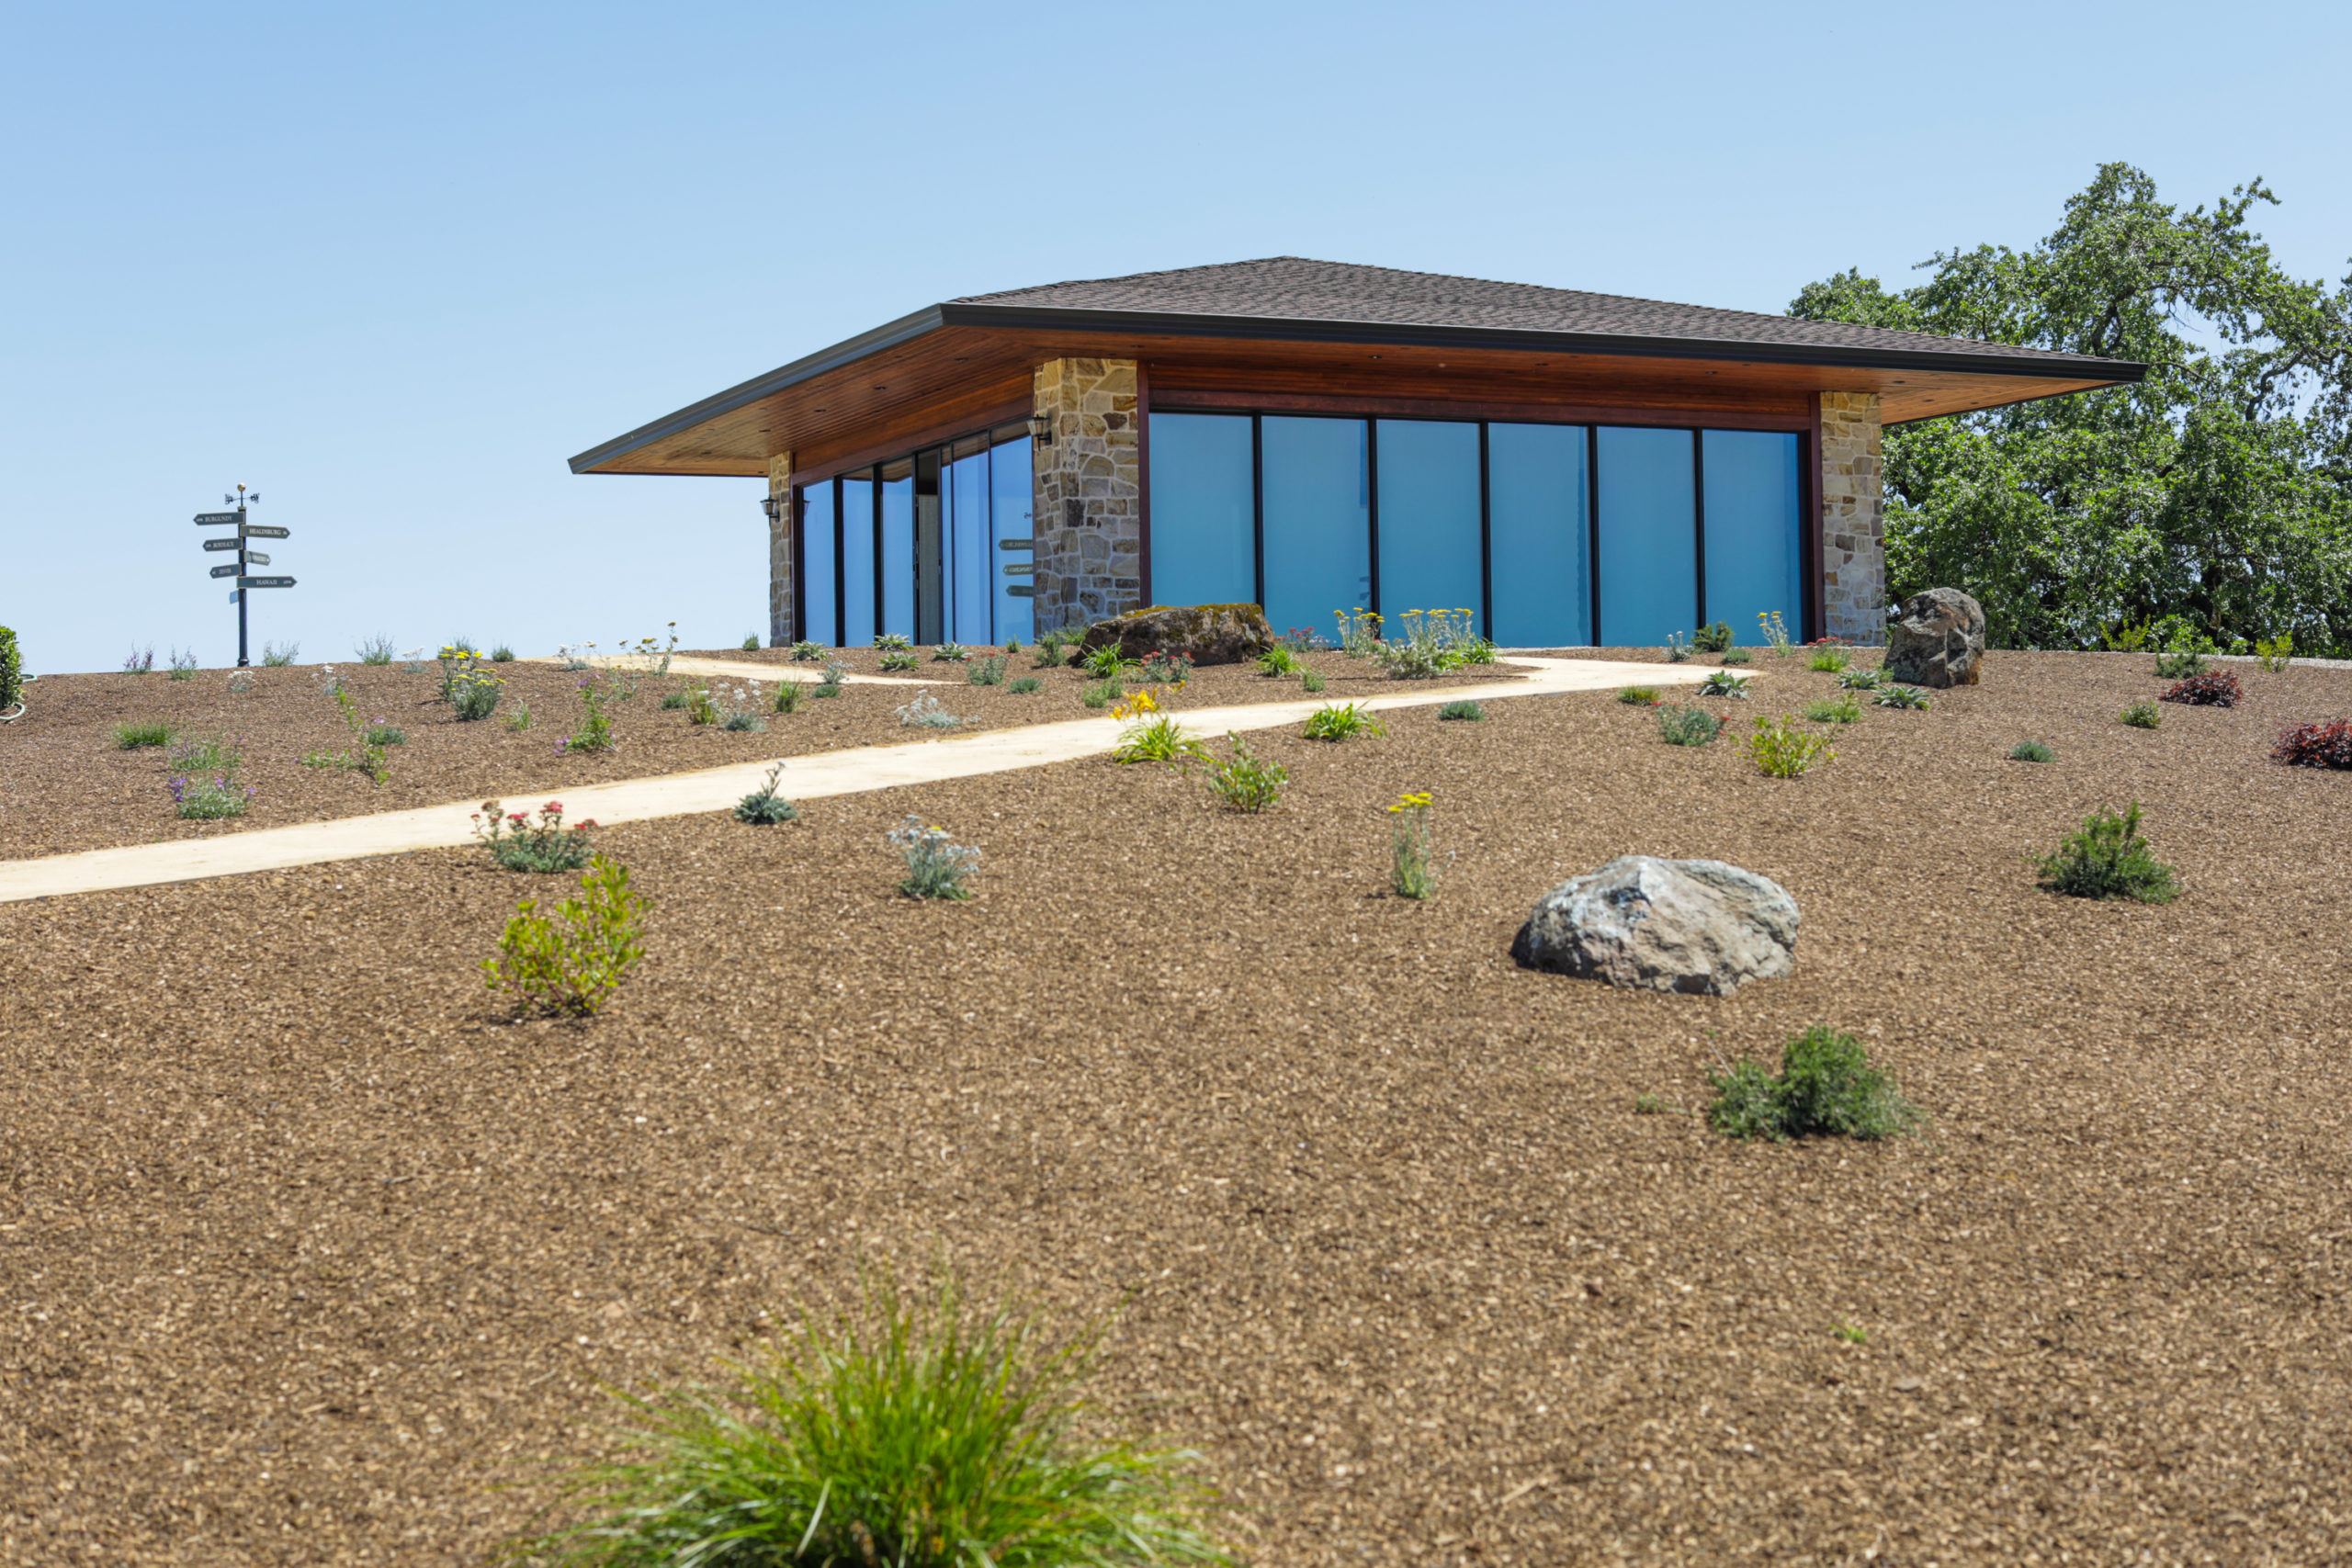 Jordan Winery Hilltop Pavilion with Pollinator Plants on New Pathway